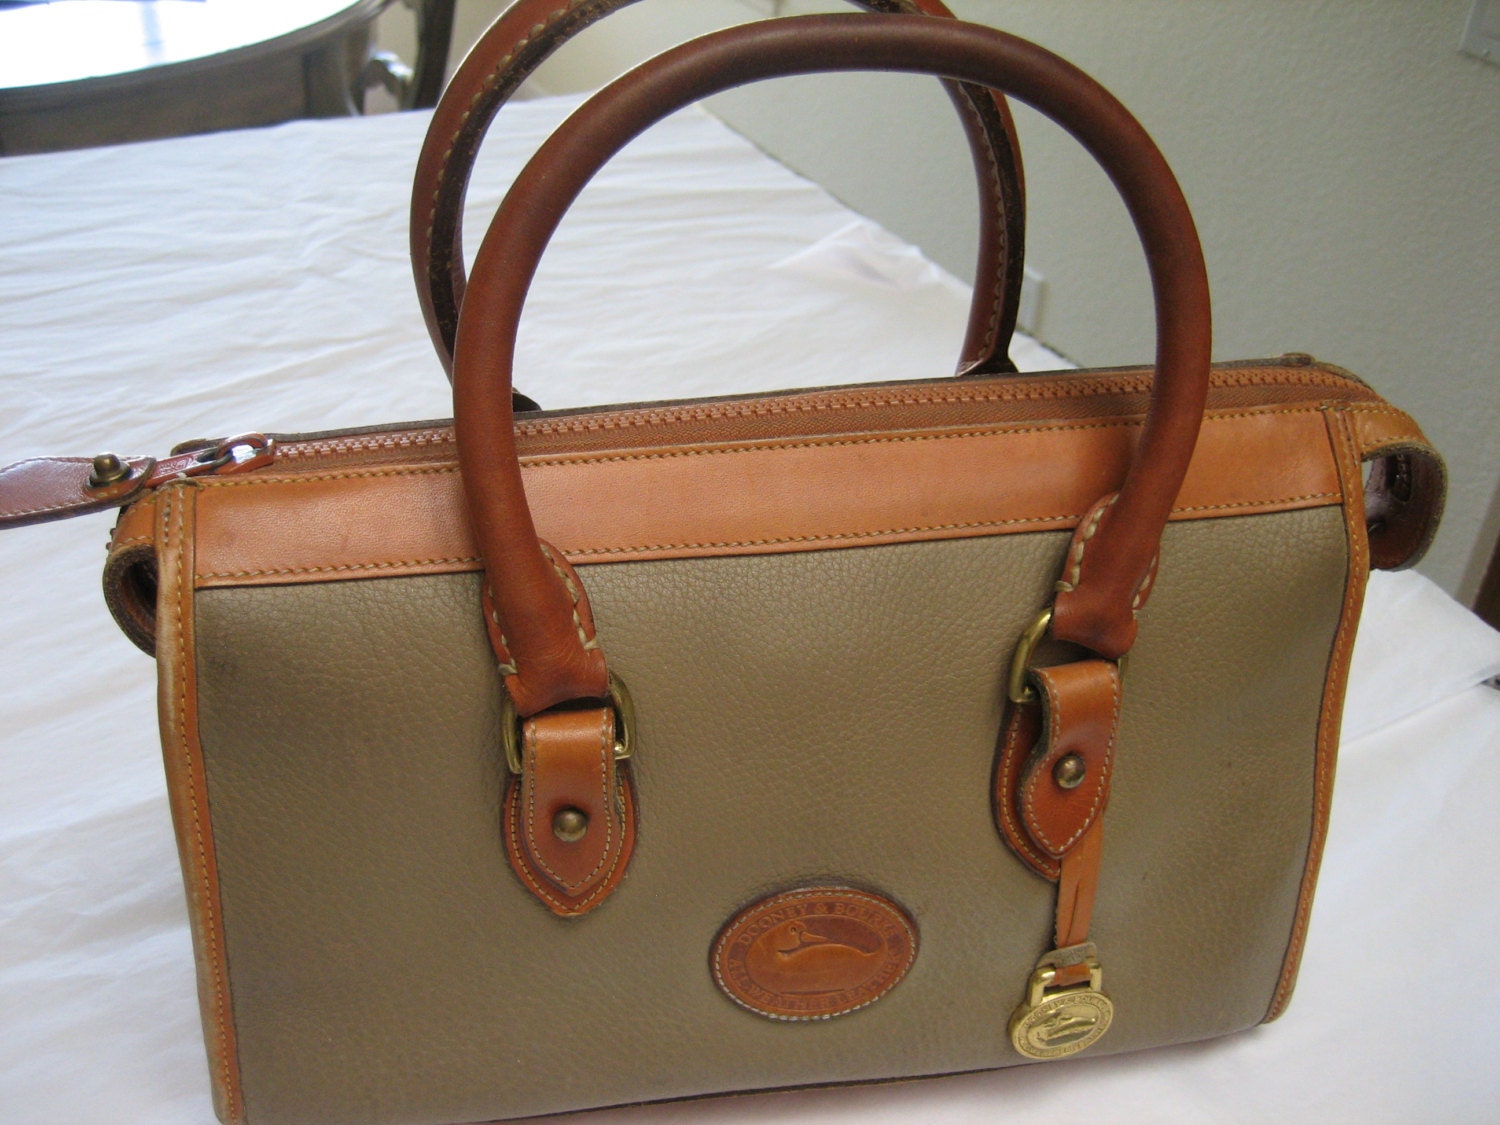 Dooney & Bourke Vintage Taupe And Tan Satchel by CLASSYBAG on Etsy